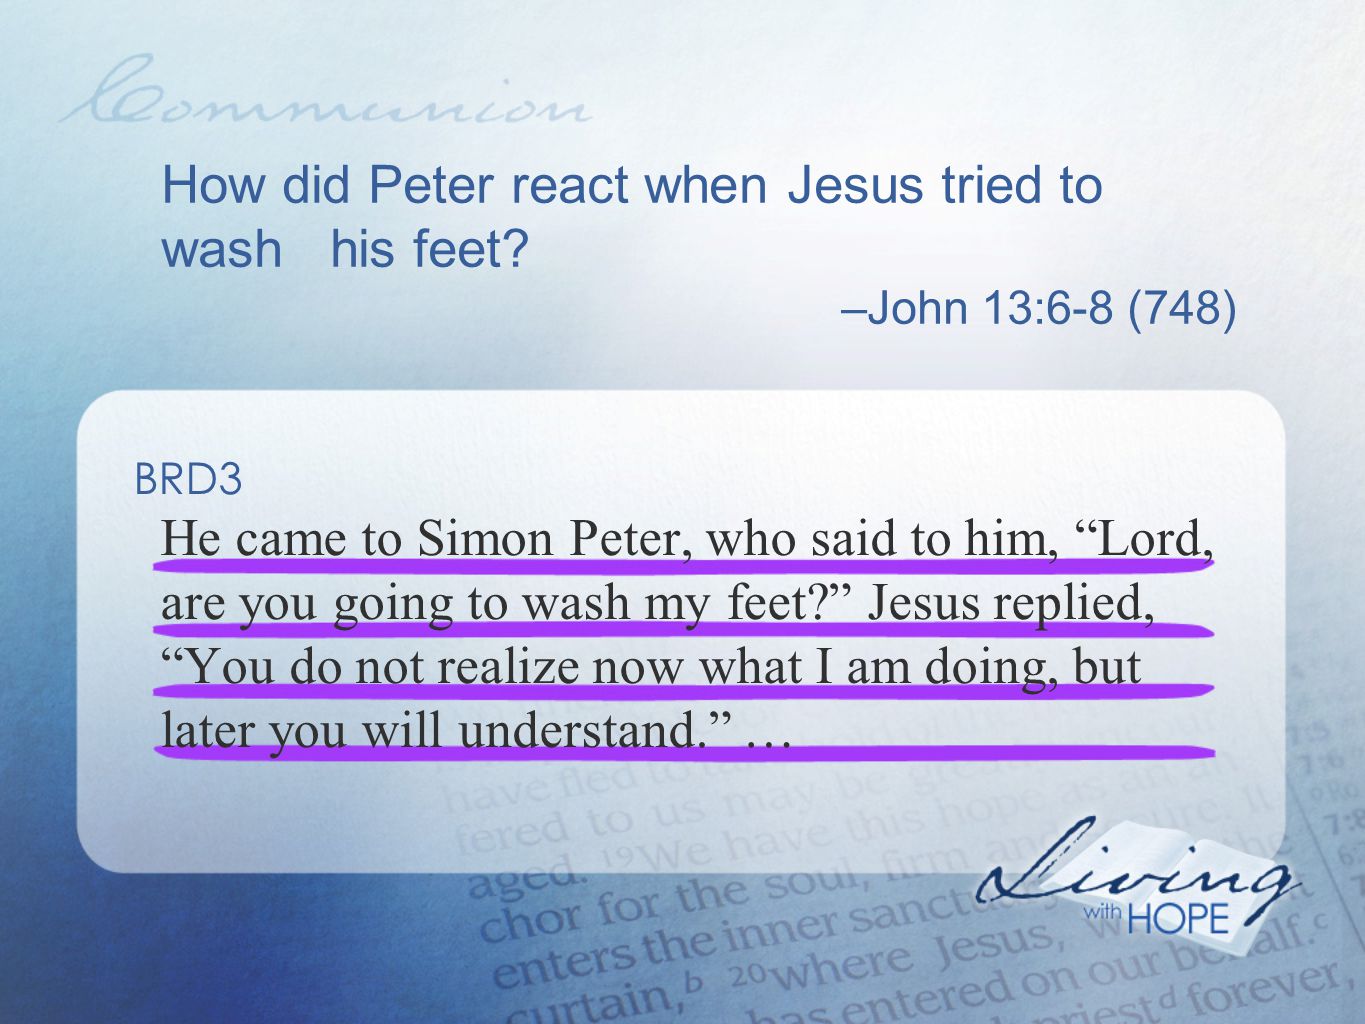 How did Peter react when Jesus tried to wash his feet